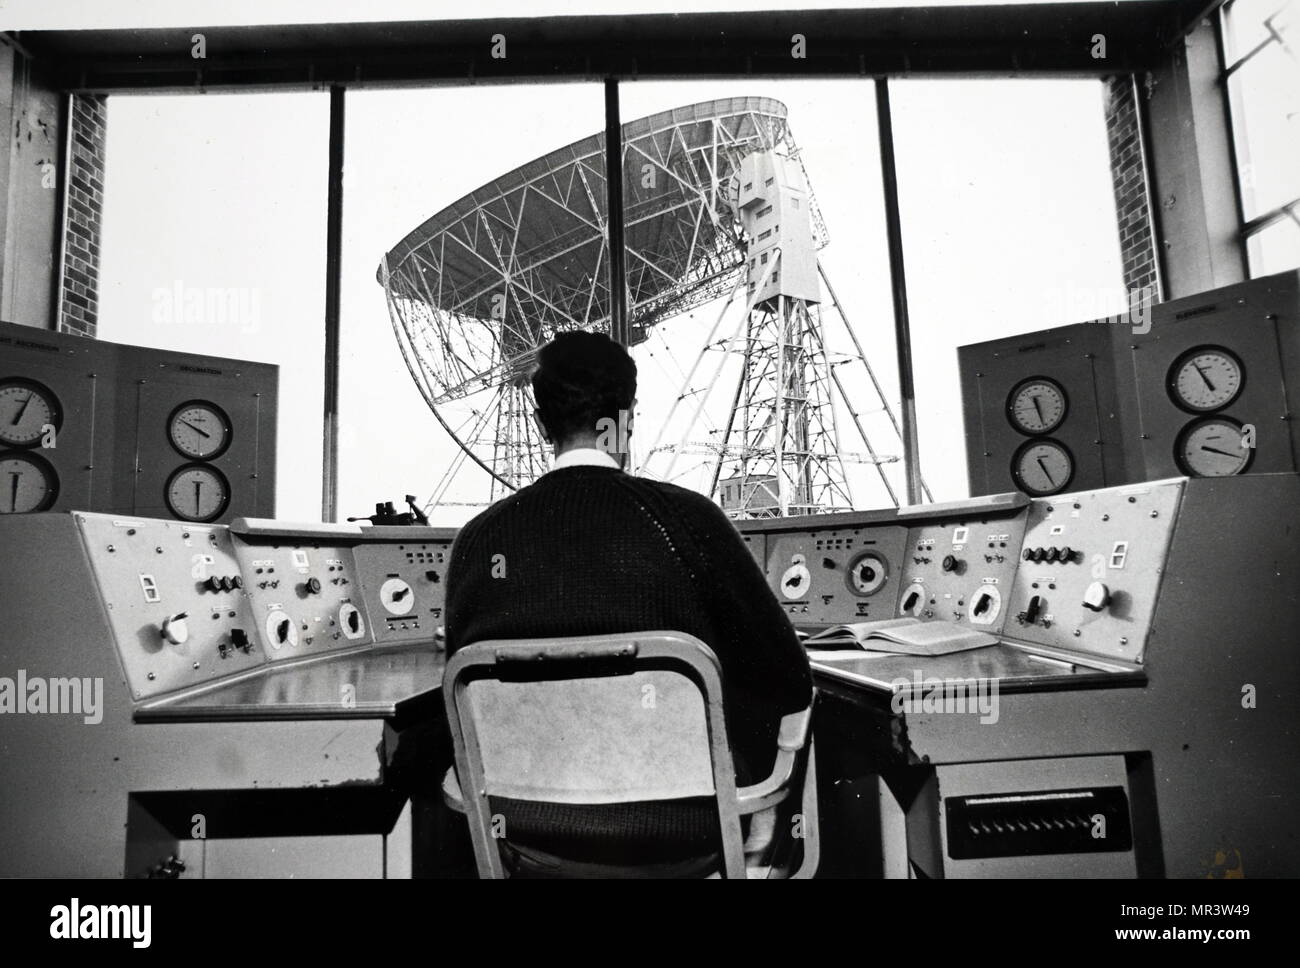 Photograph of the Mark II radio telescope at Jodrell Bank, University of Manchester, as viewed from the control room. Dated 20th century Stock Photo